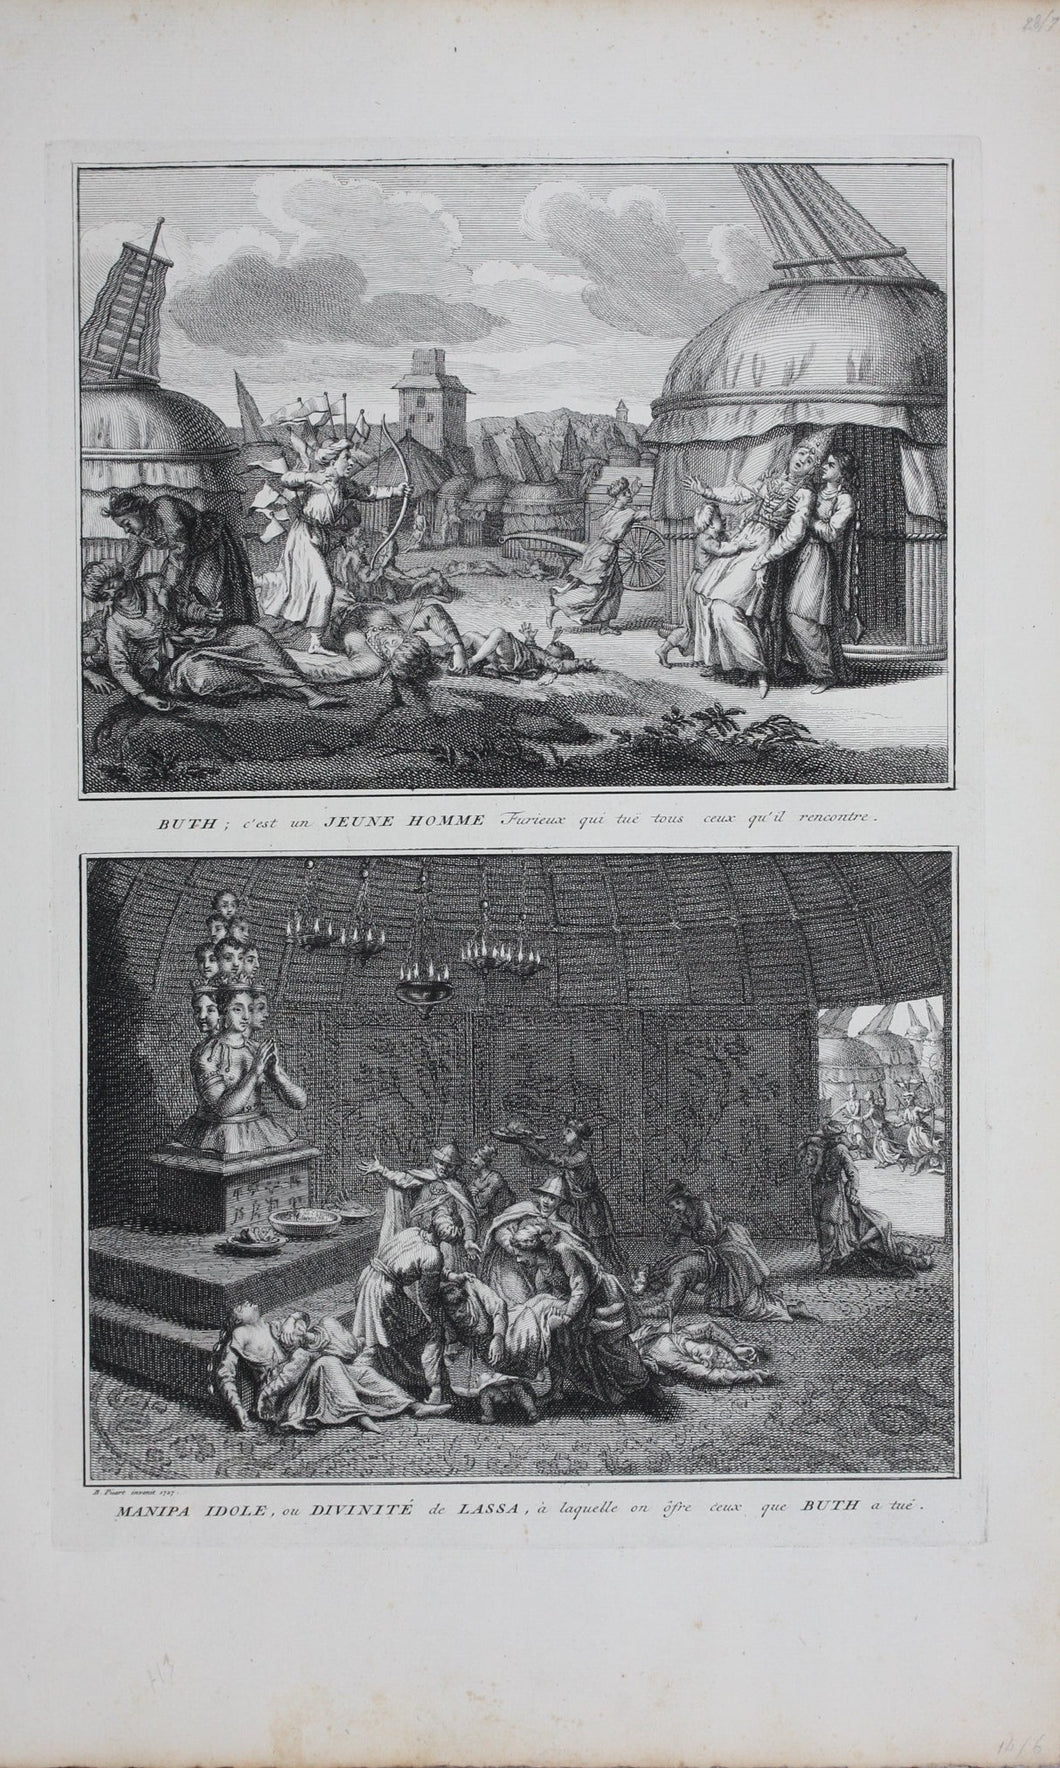 Bernard Picart. Buth, the deity of death. Worship of Manipa. Engraving. 1727.